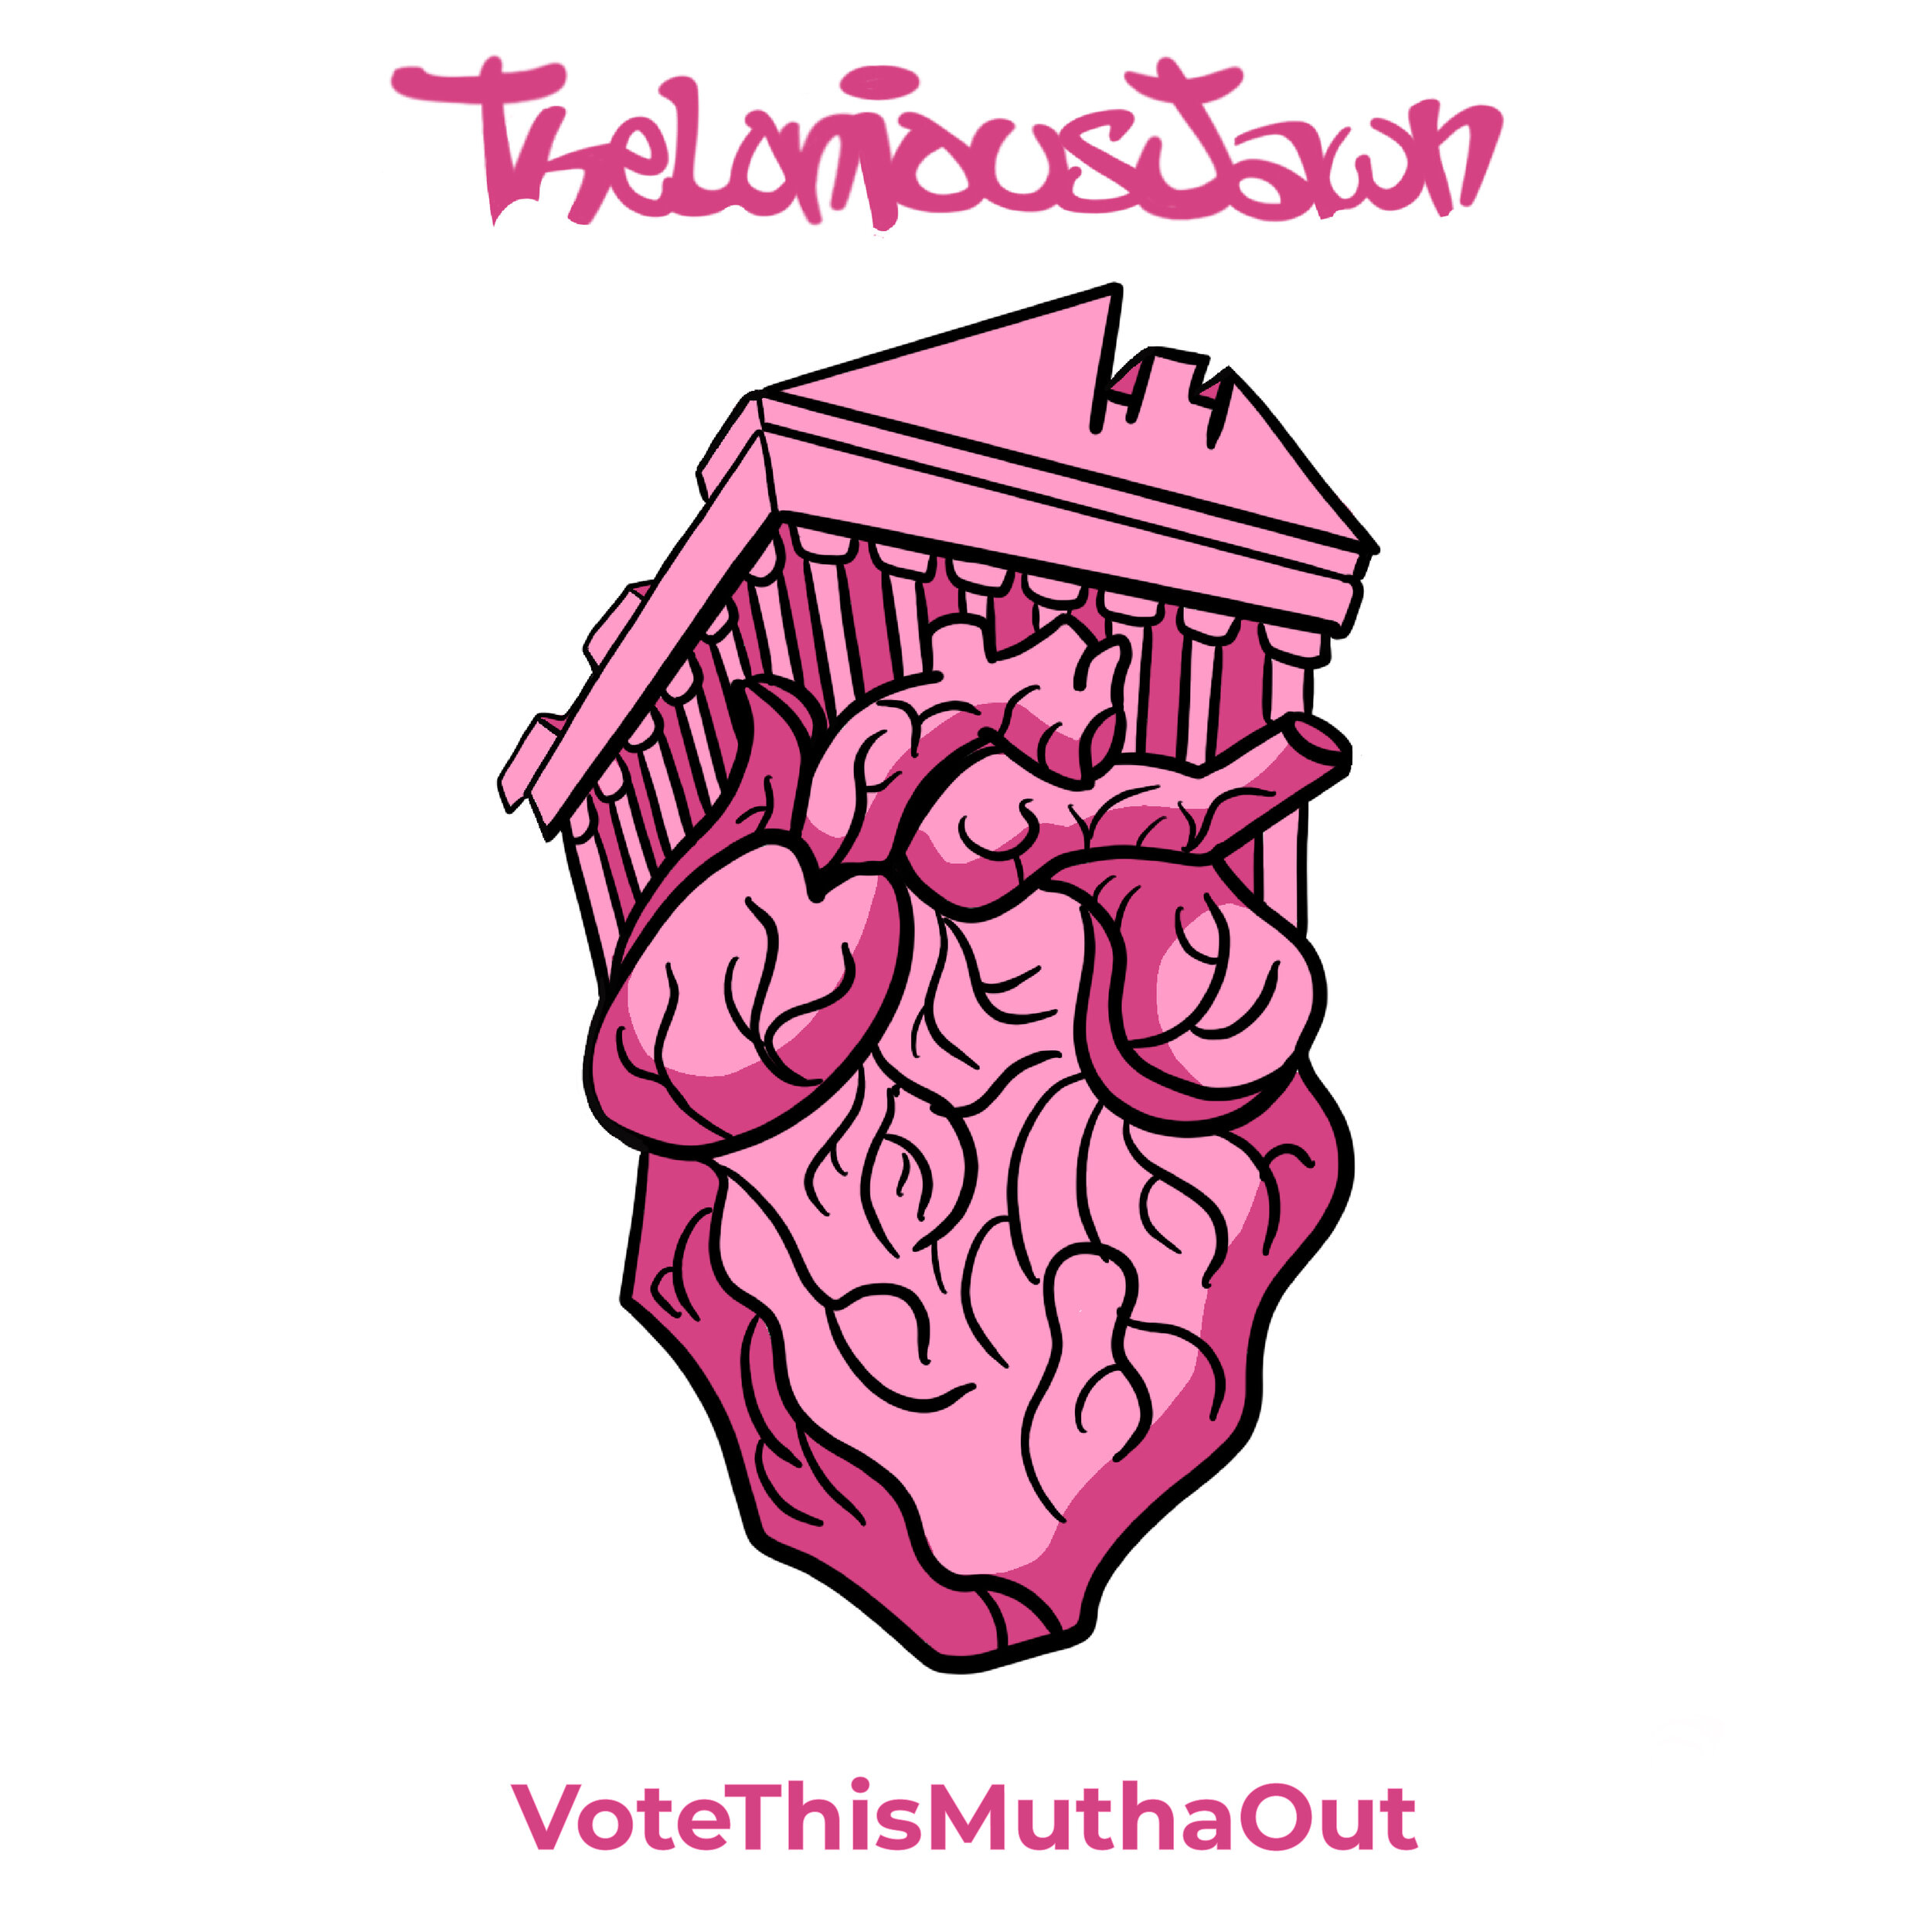 Thelonious Jawn - Vote This Mutha Out.jpg